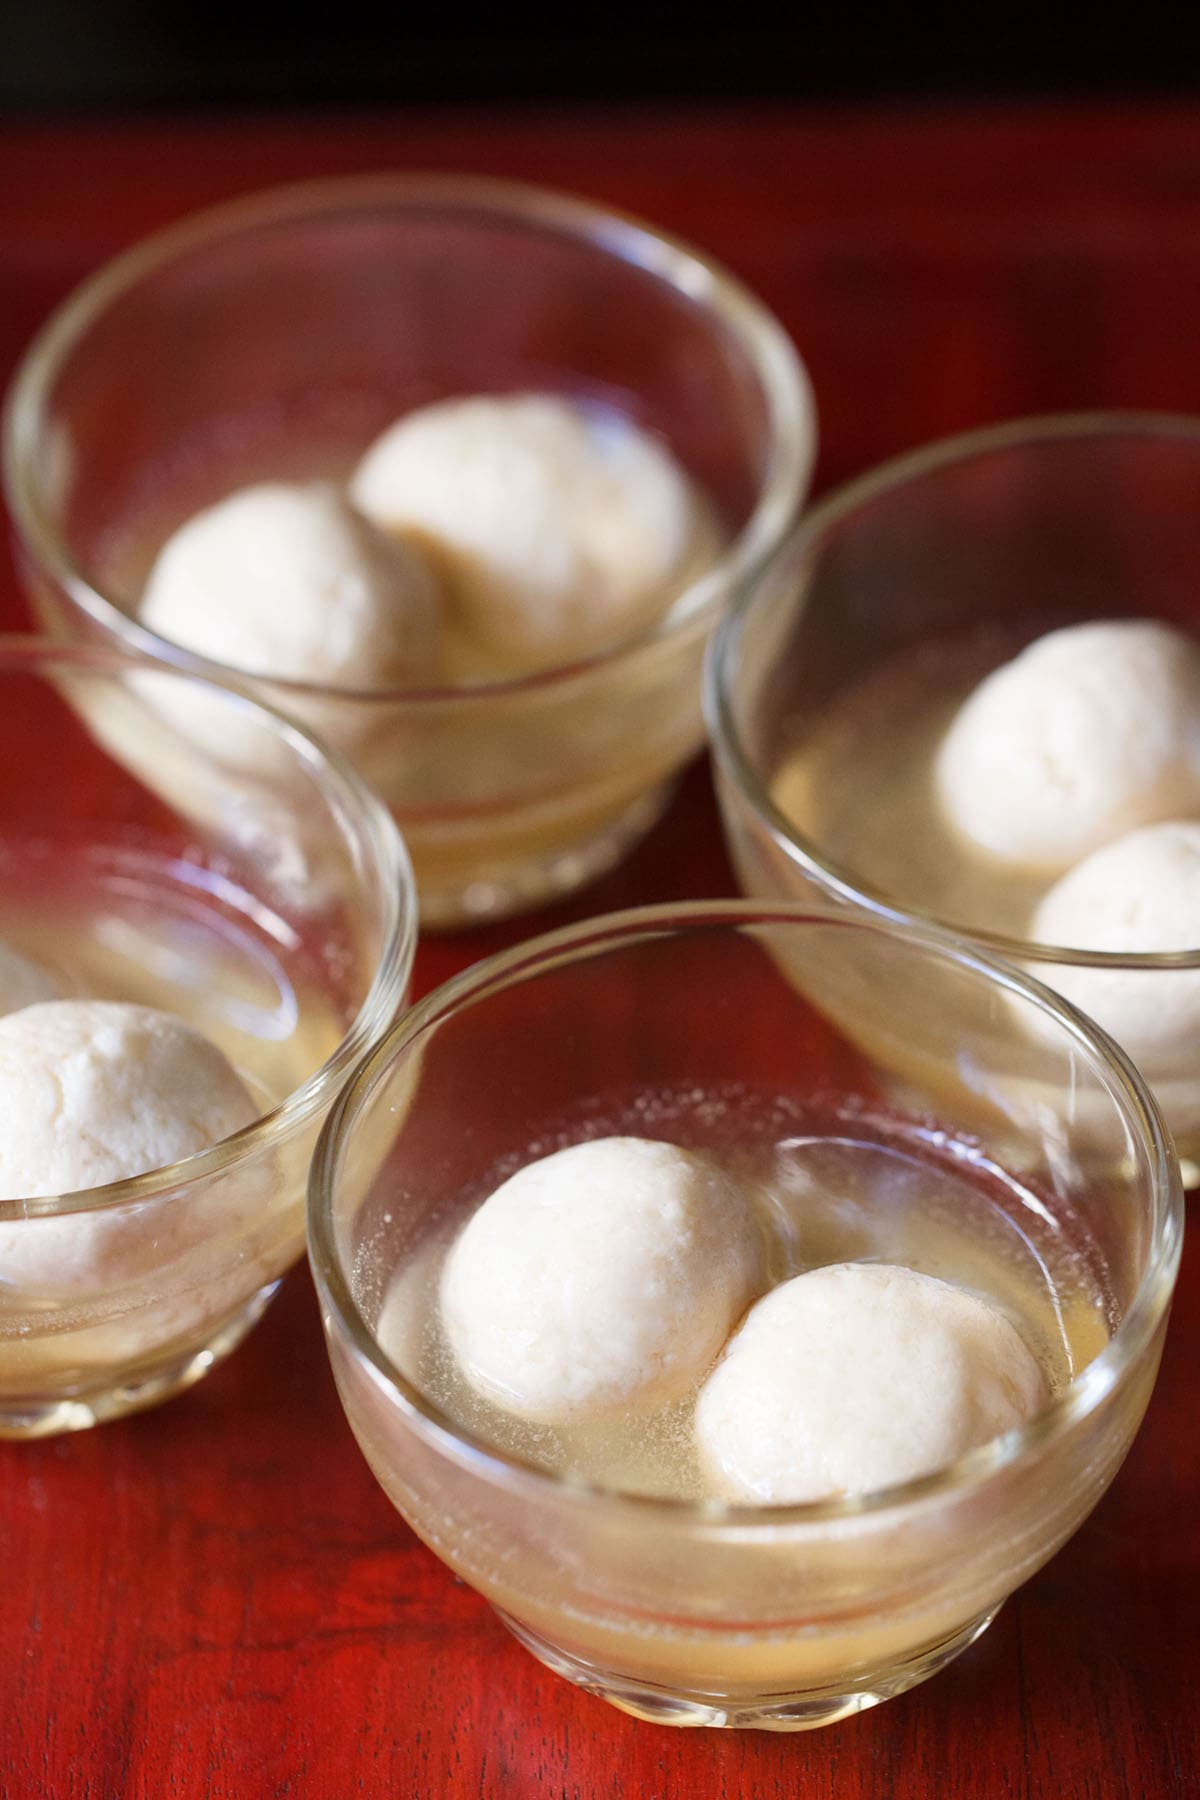 4 small glass bowls with two rasgulla in sugar syrup each